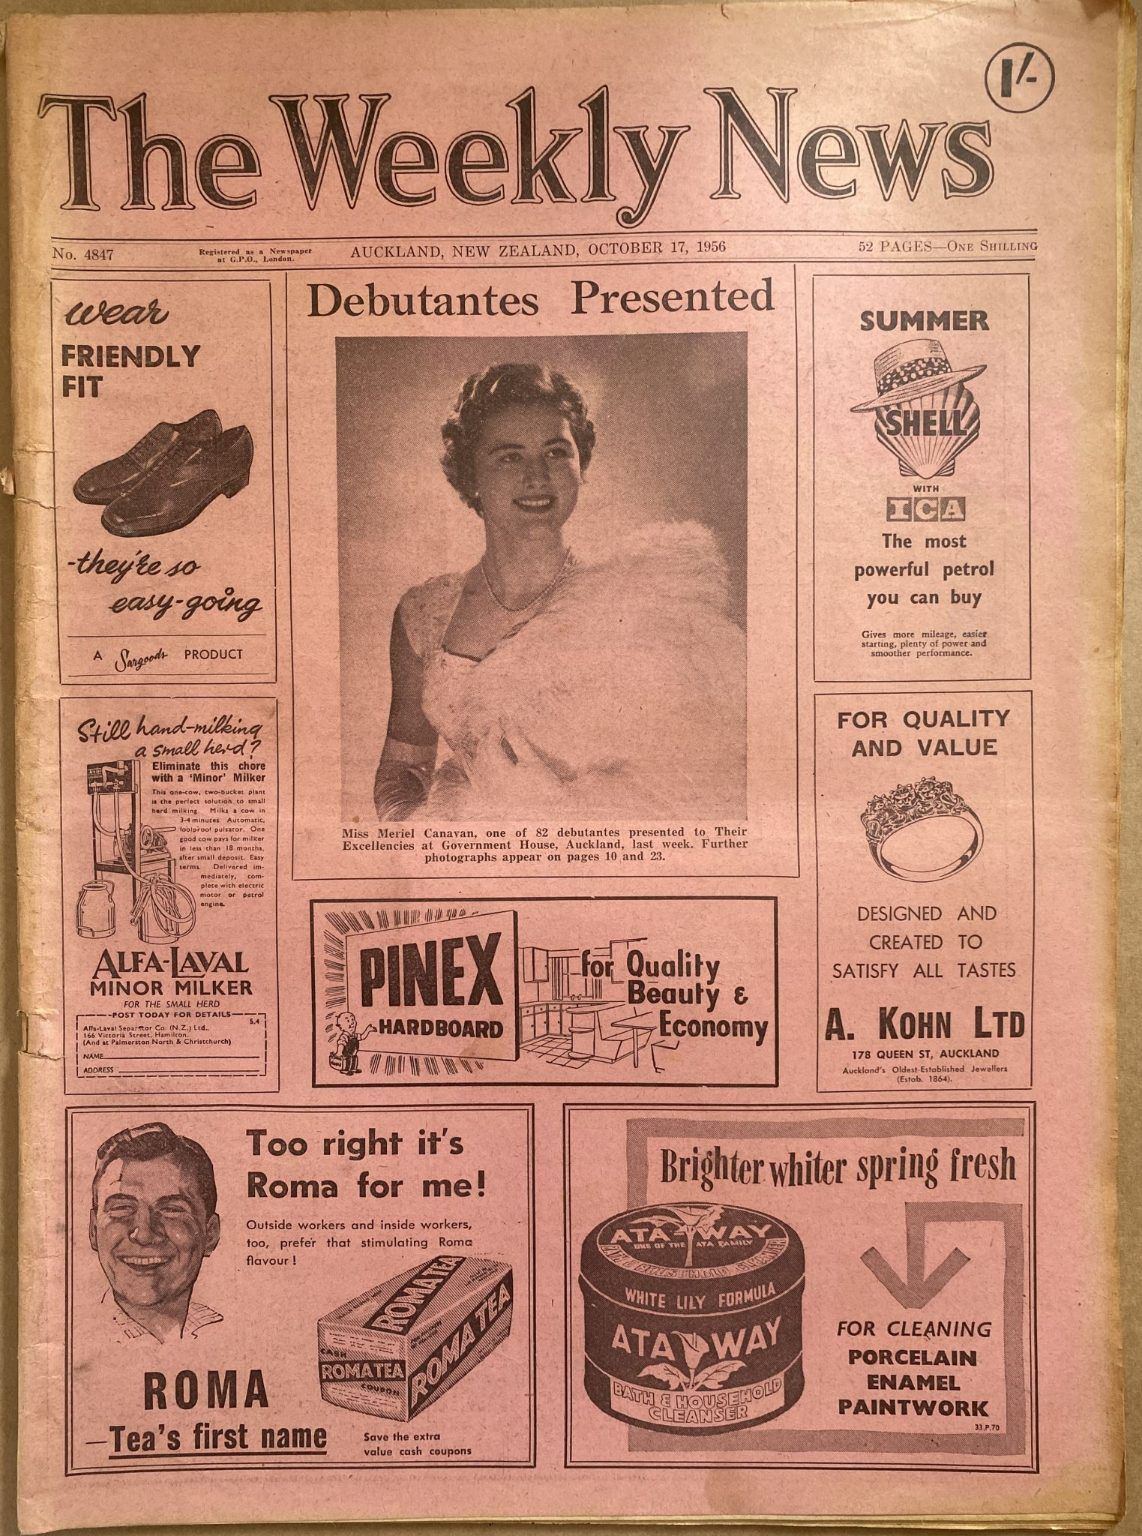 OLD NEWSPAPER: The Weekly News - No. 4847, 17 October 1956